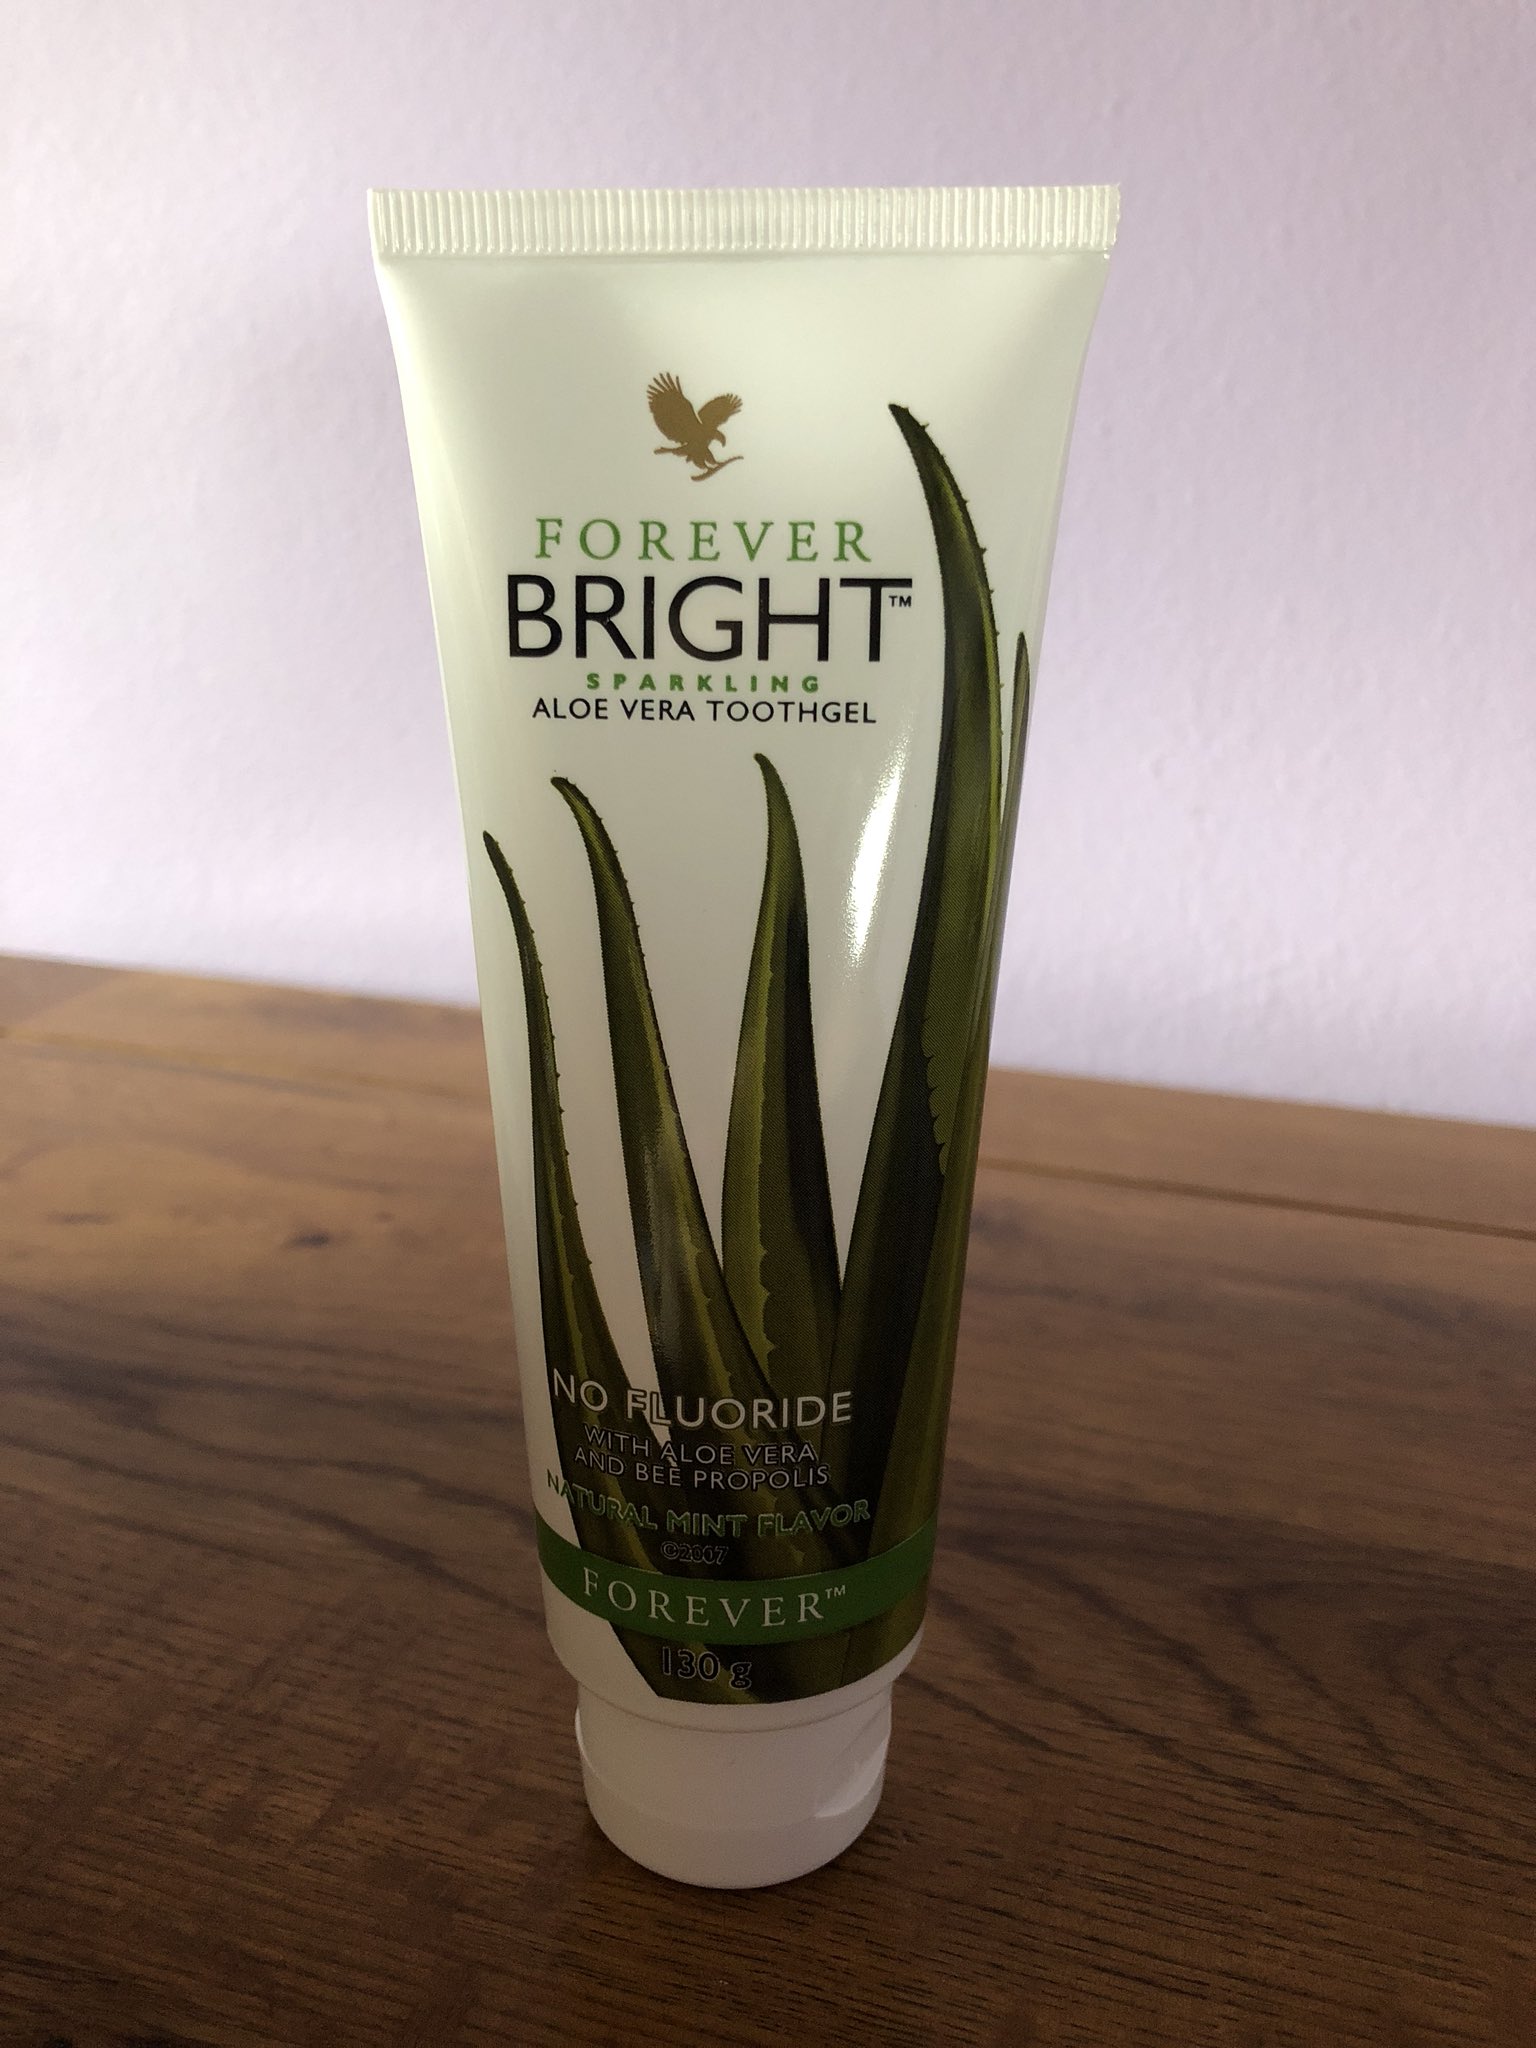 Jo's Forever Aloe on X: "Forever Bright Toothgel This gentle, non-fluoride  formula contains only the highest quality ingredients including aloe Vera &  bee propolis. Enjoy a natural mint flavour for a taste